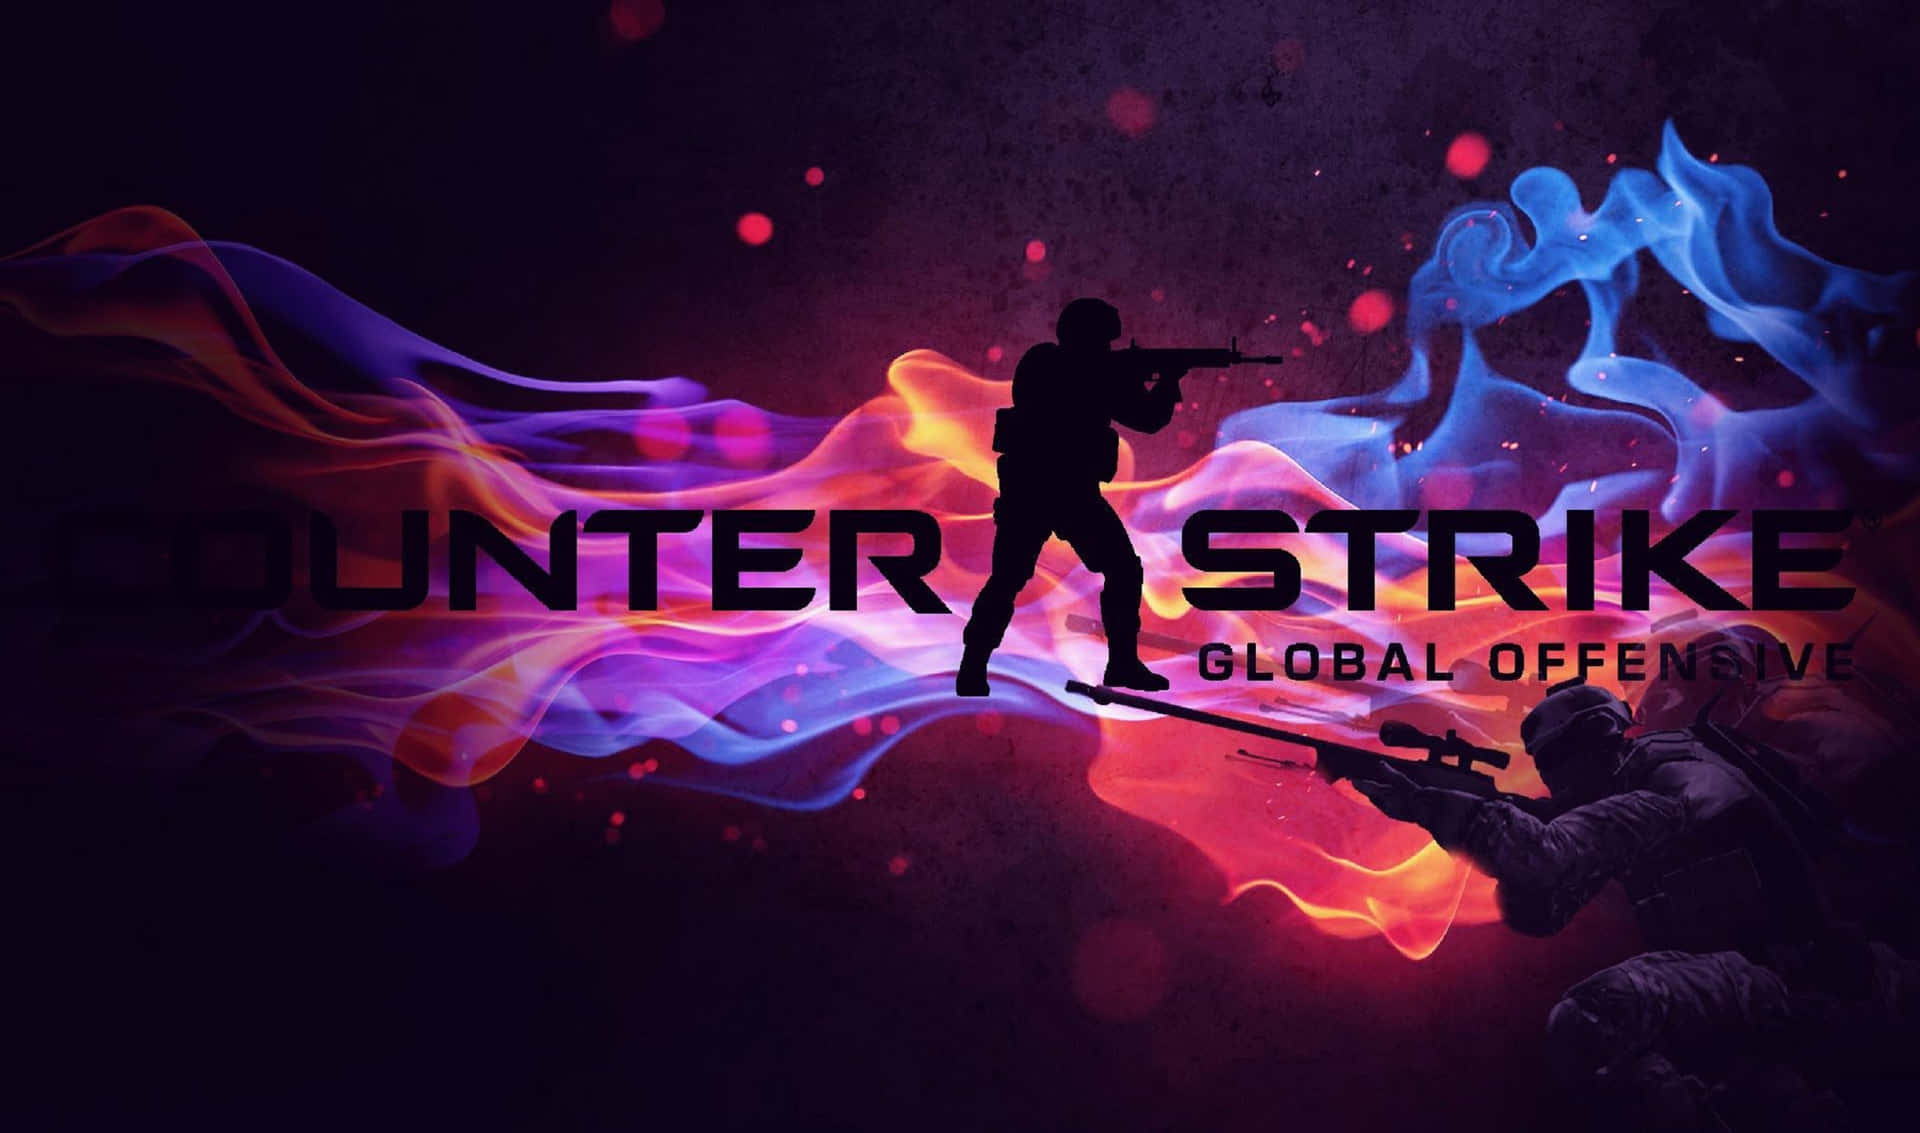 Get ready for a game of Counter-Strike Global Offensive